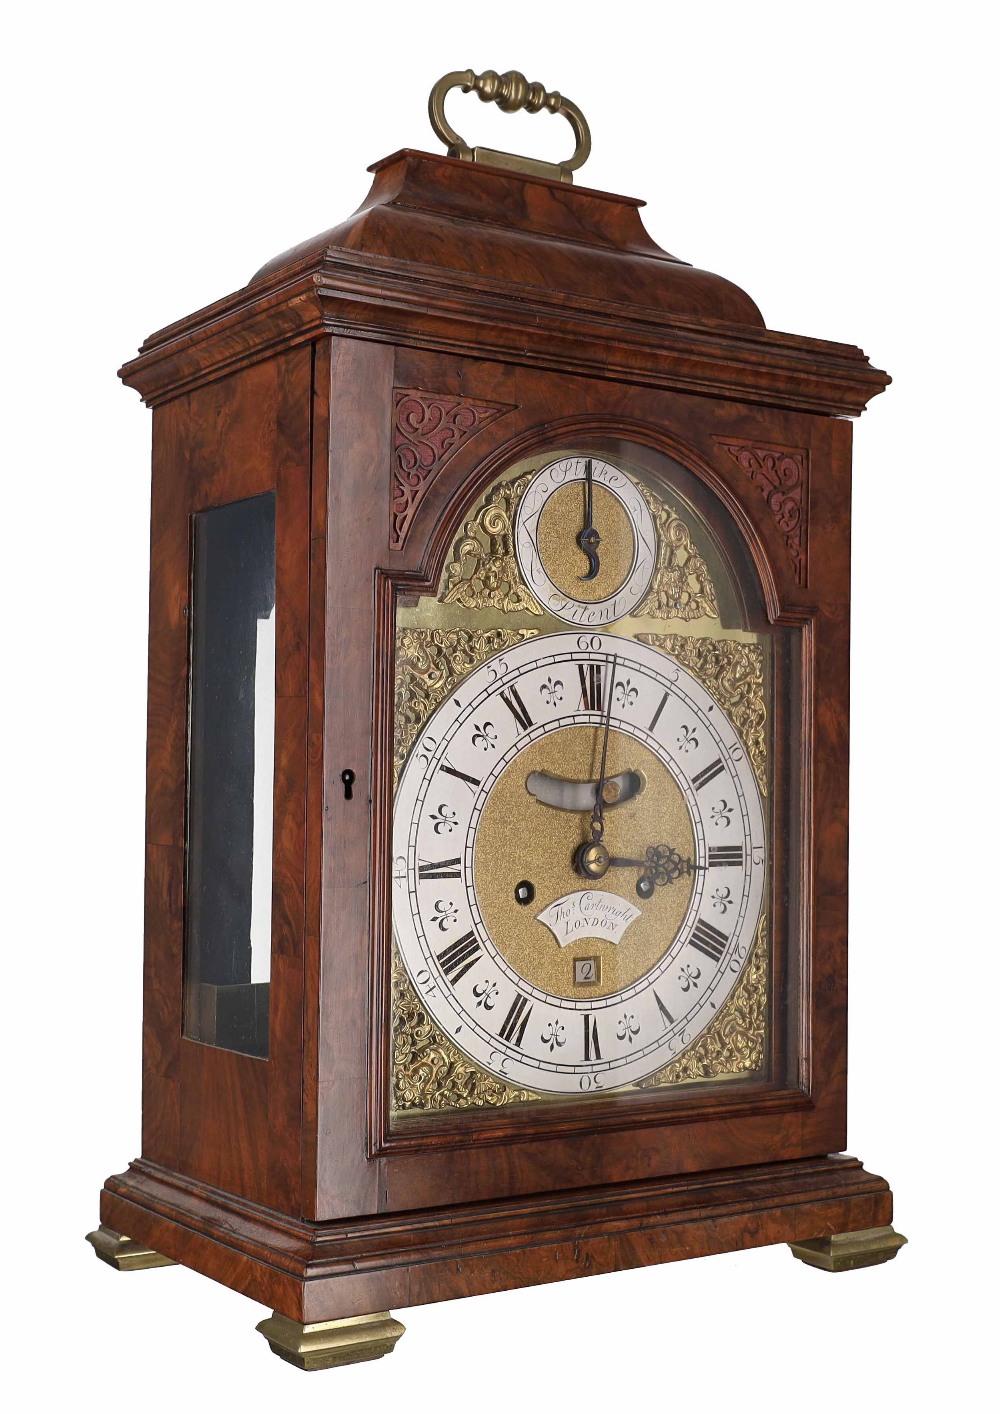 English walnut double fusee verge bracket clock, signed Thomas Cartwright, London on an arched - Image 2 of 3